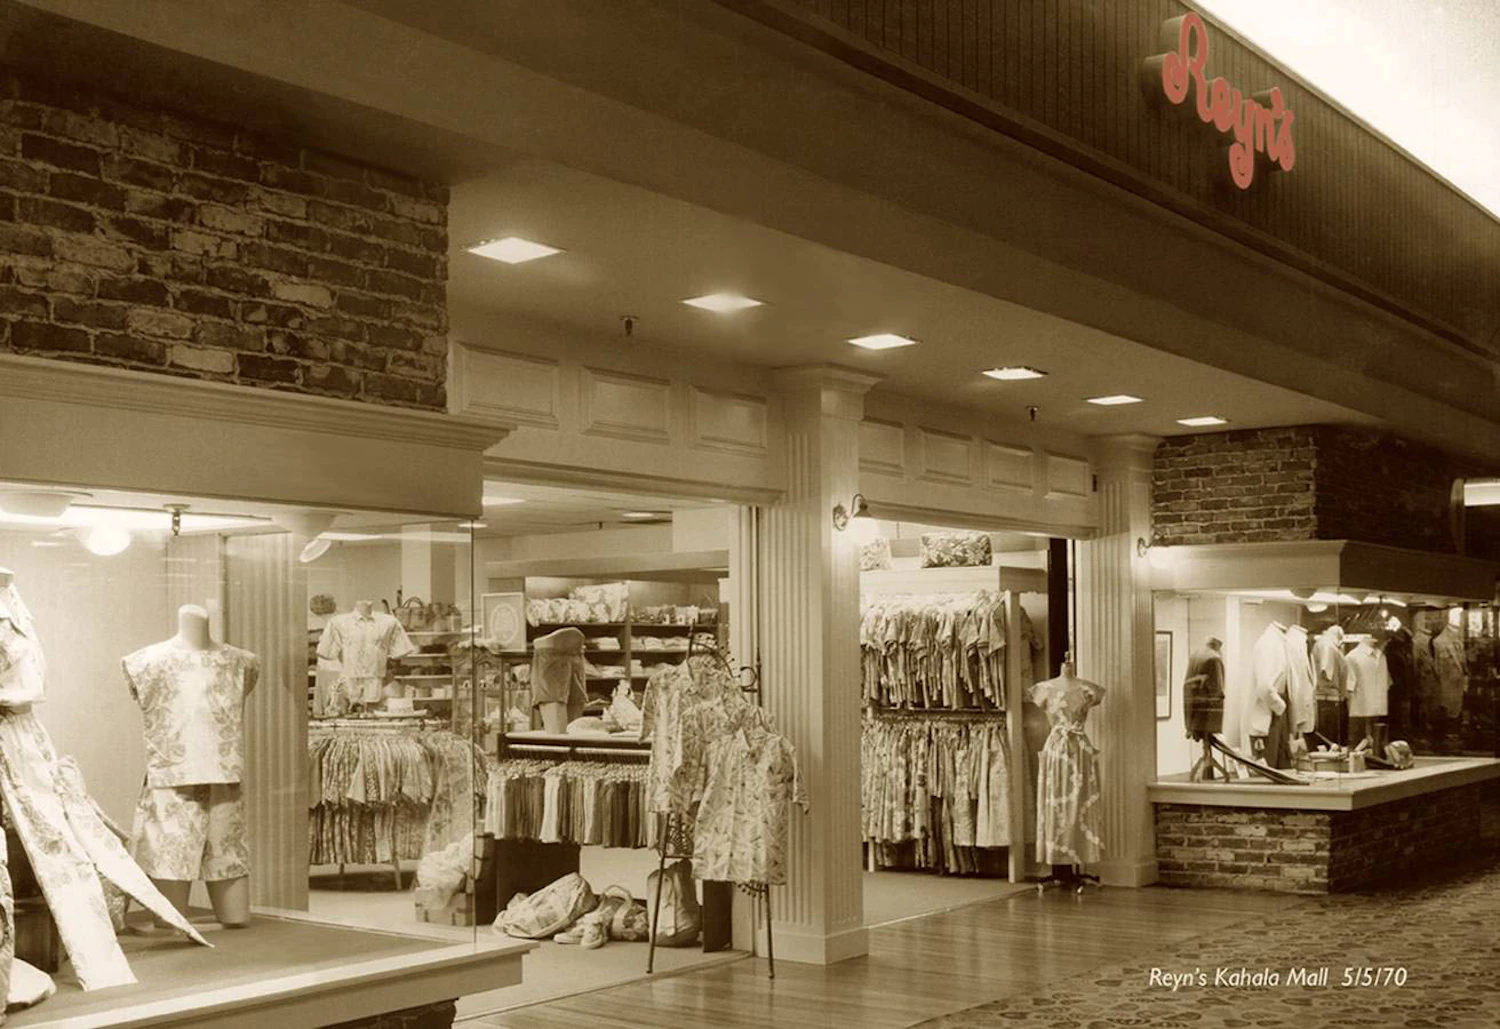 Reyn's, opened at Kahala Mall in 1963